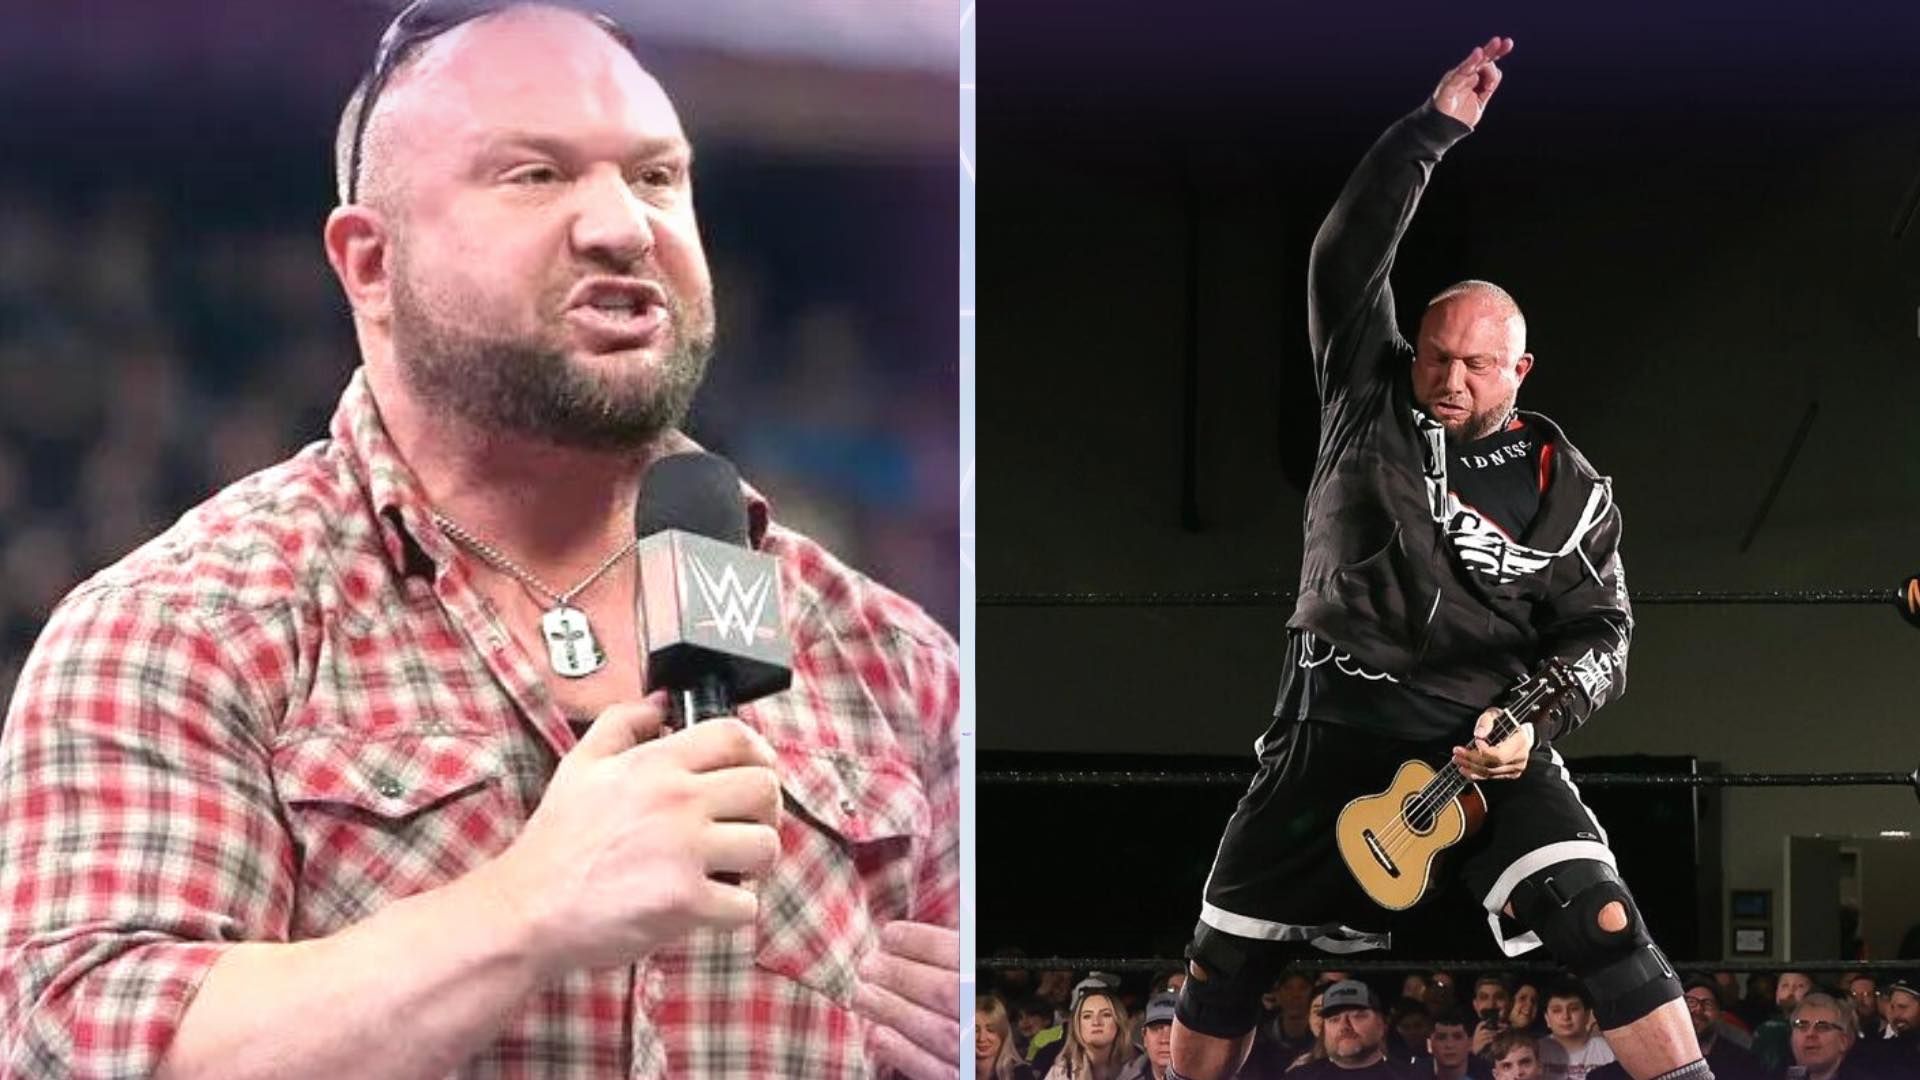 Bubba Ray Dudley is a WWE Hall of Famer.